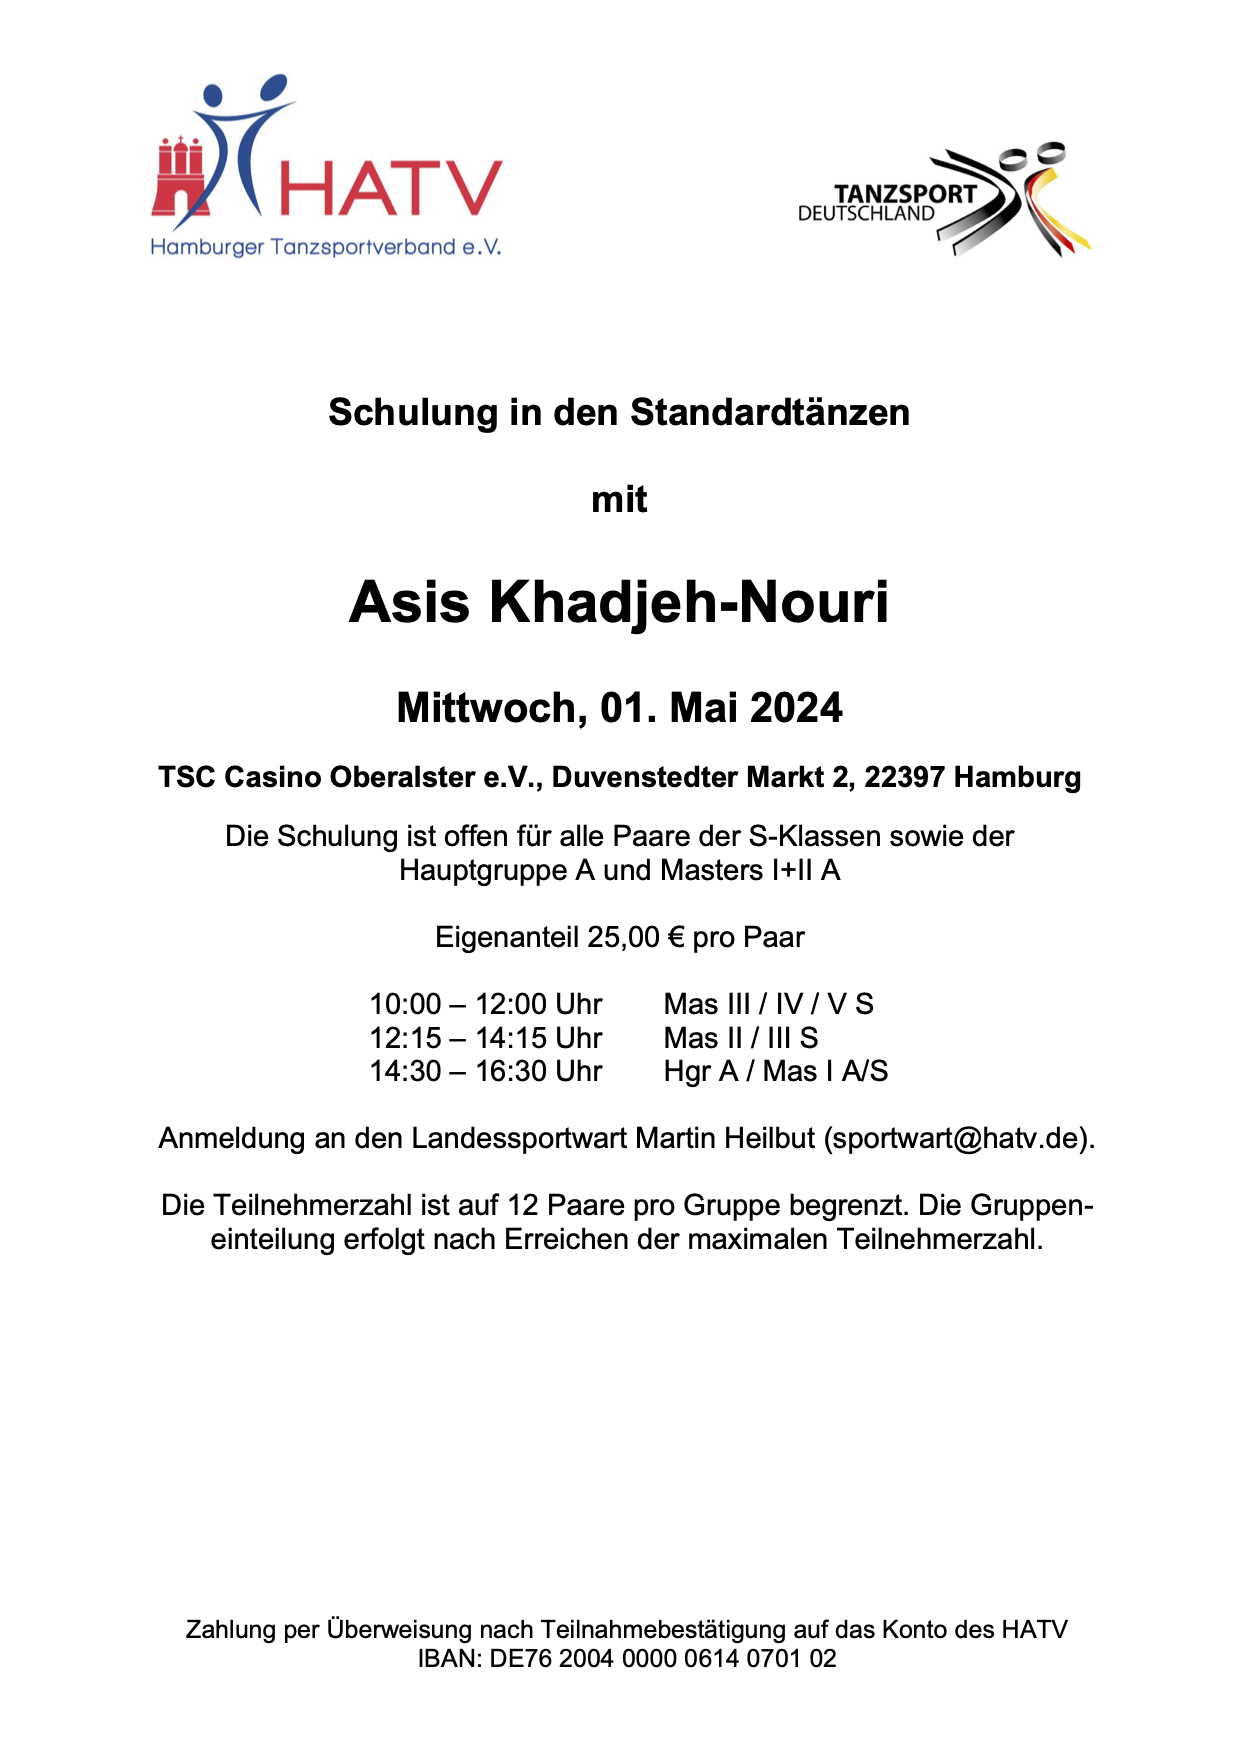 AK-Schulung_01.05.2024.png